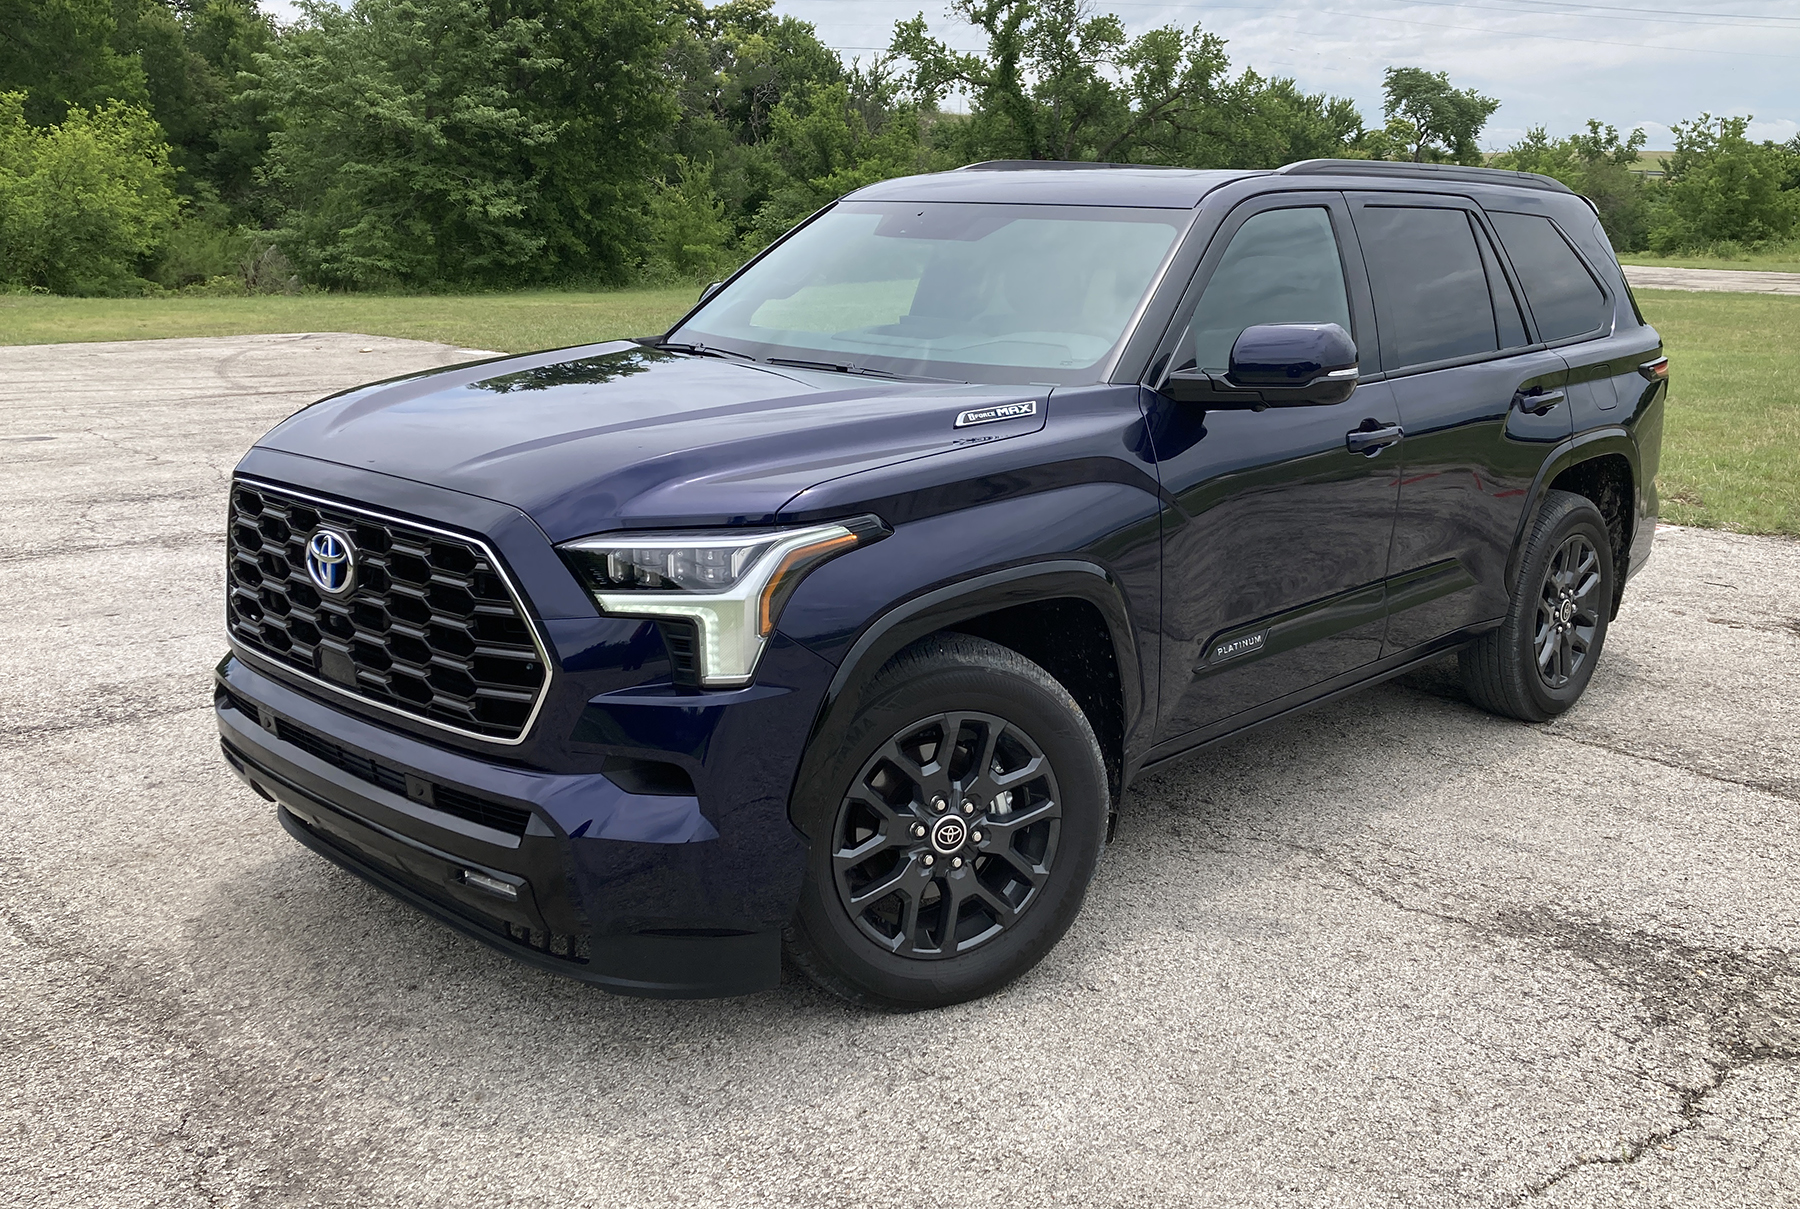 First Spin: 2023 Toyota Sequoia | The Daily Drive | Consumer Guide® The